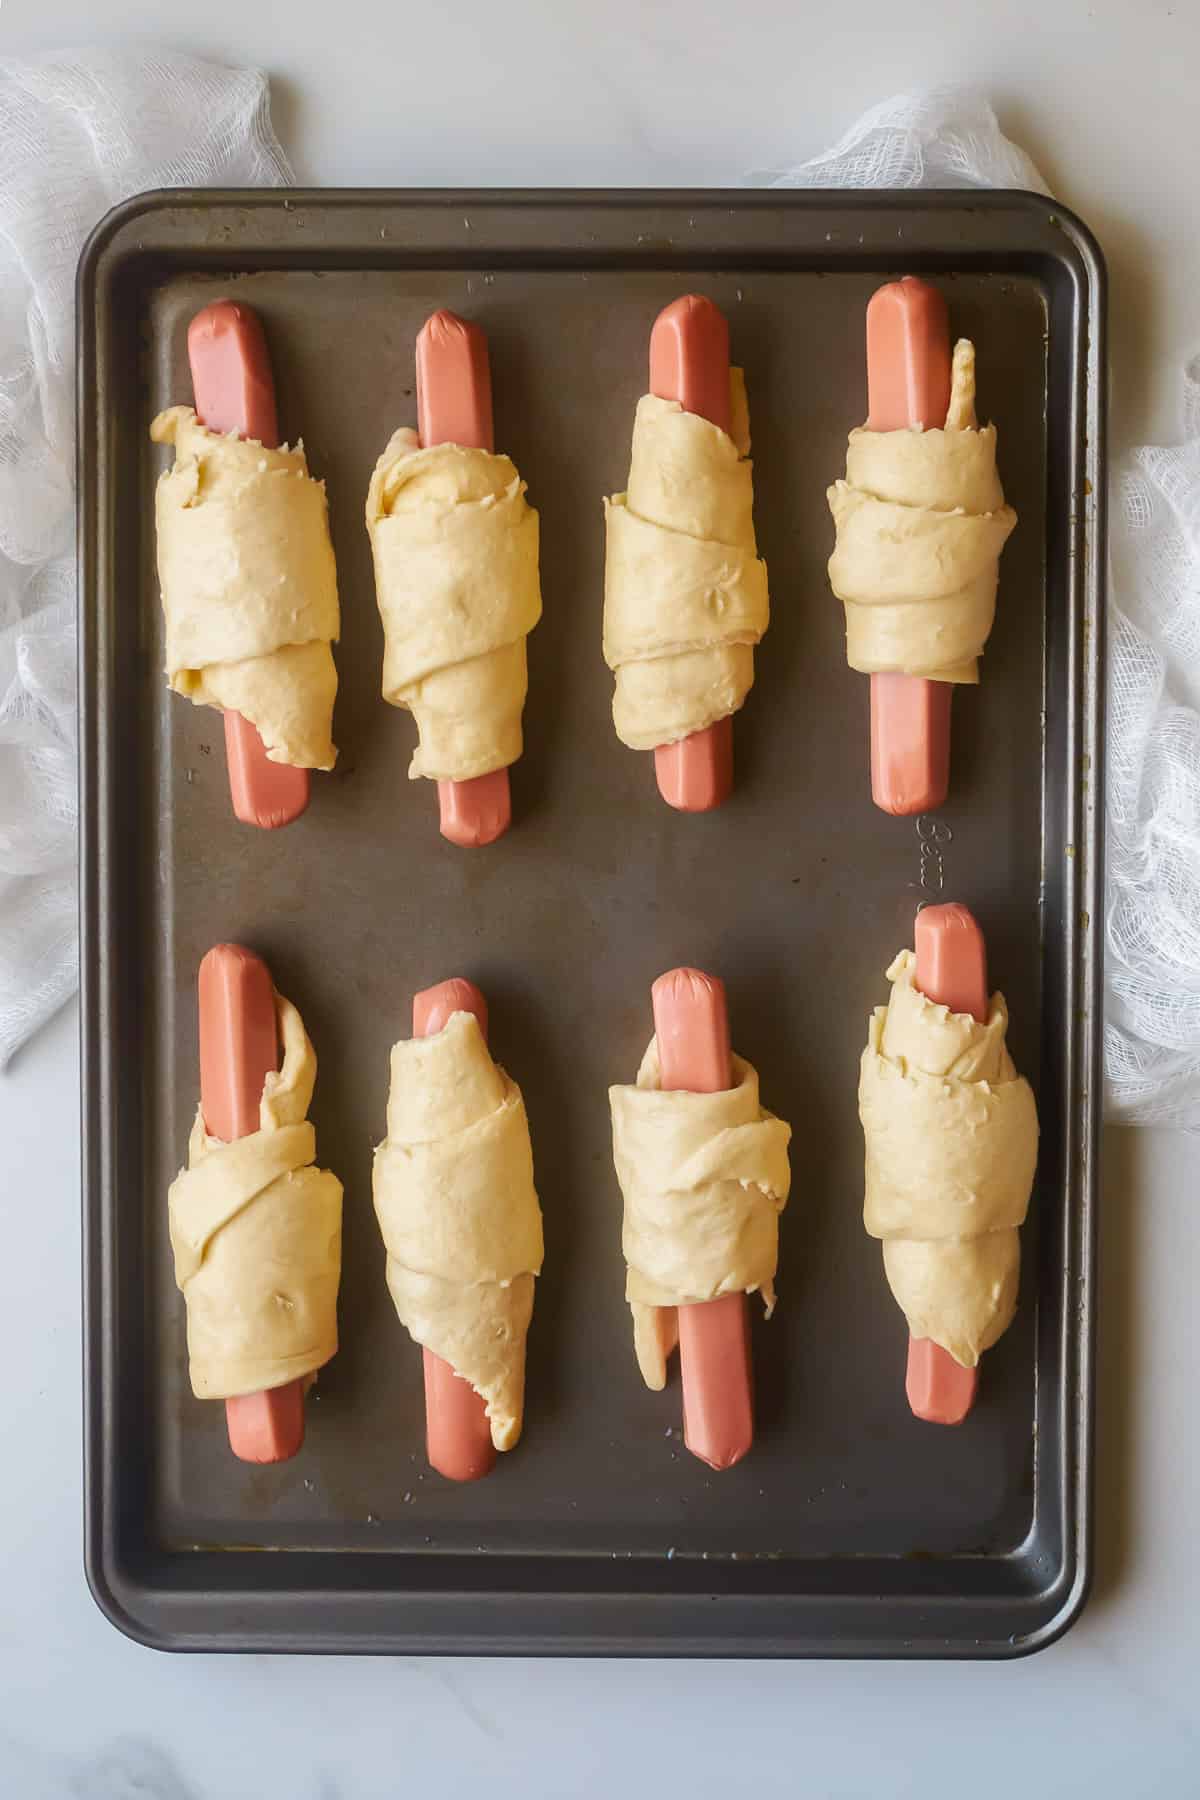 Hot dogs wrapped in crescent dough on a baking sheet ready to cook.